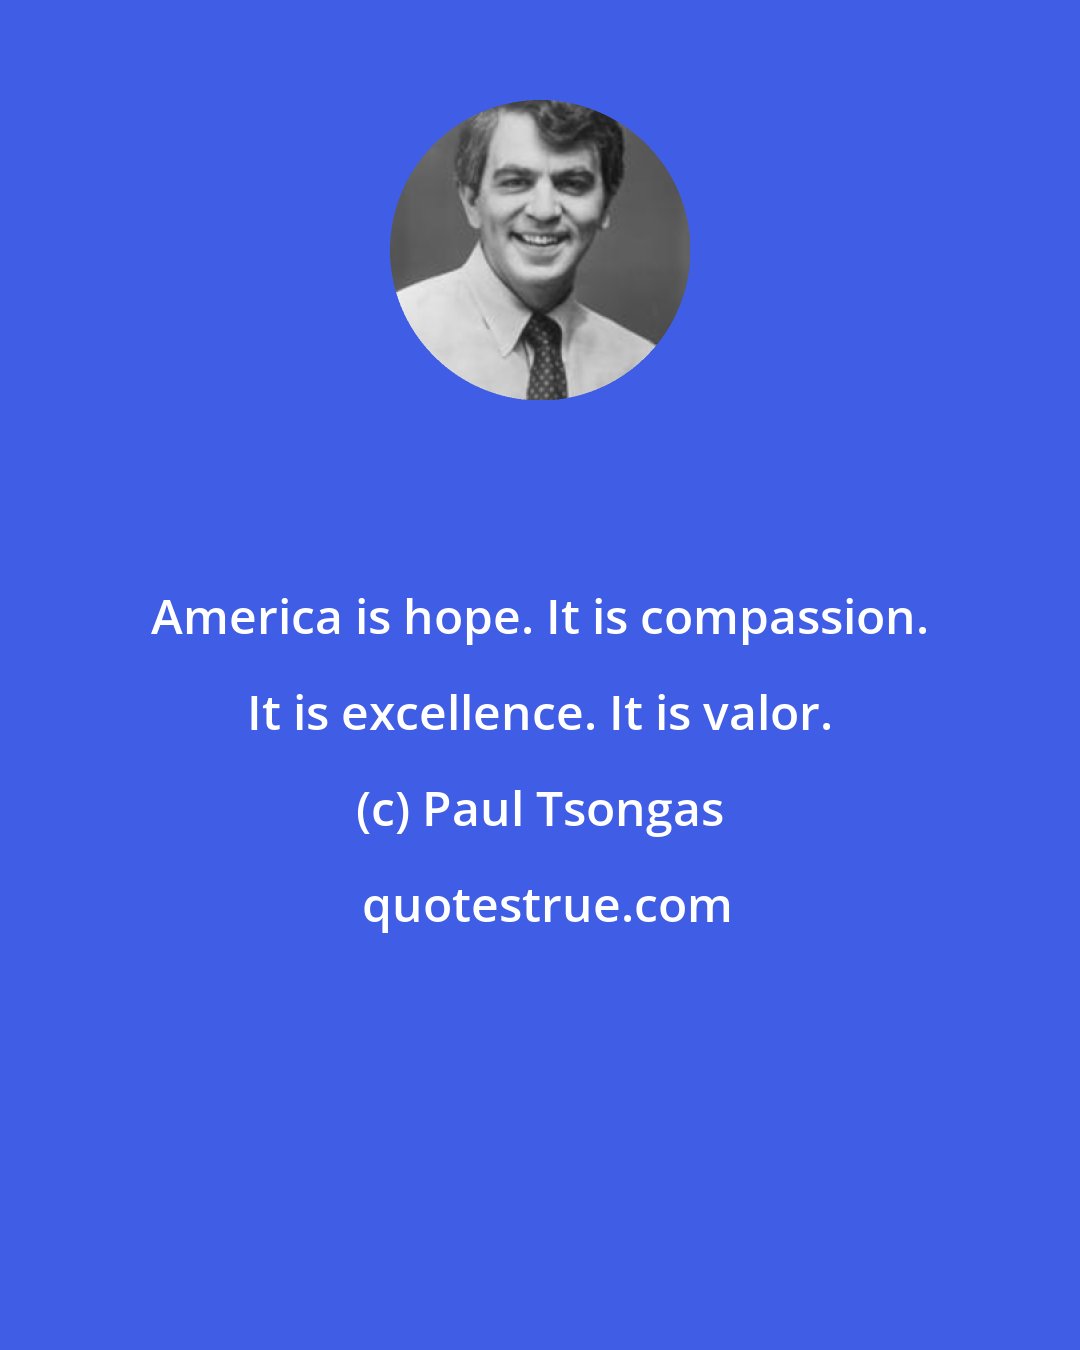 Paul Tsongas: America is hope. It is compassion. It is excellence. It is valor.